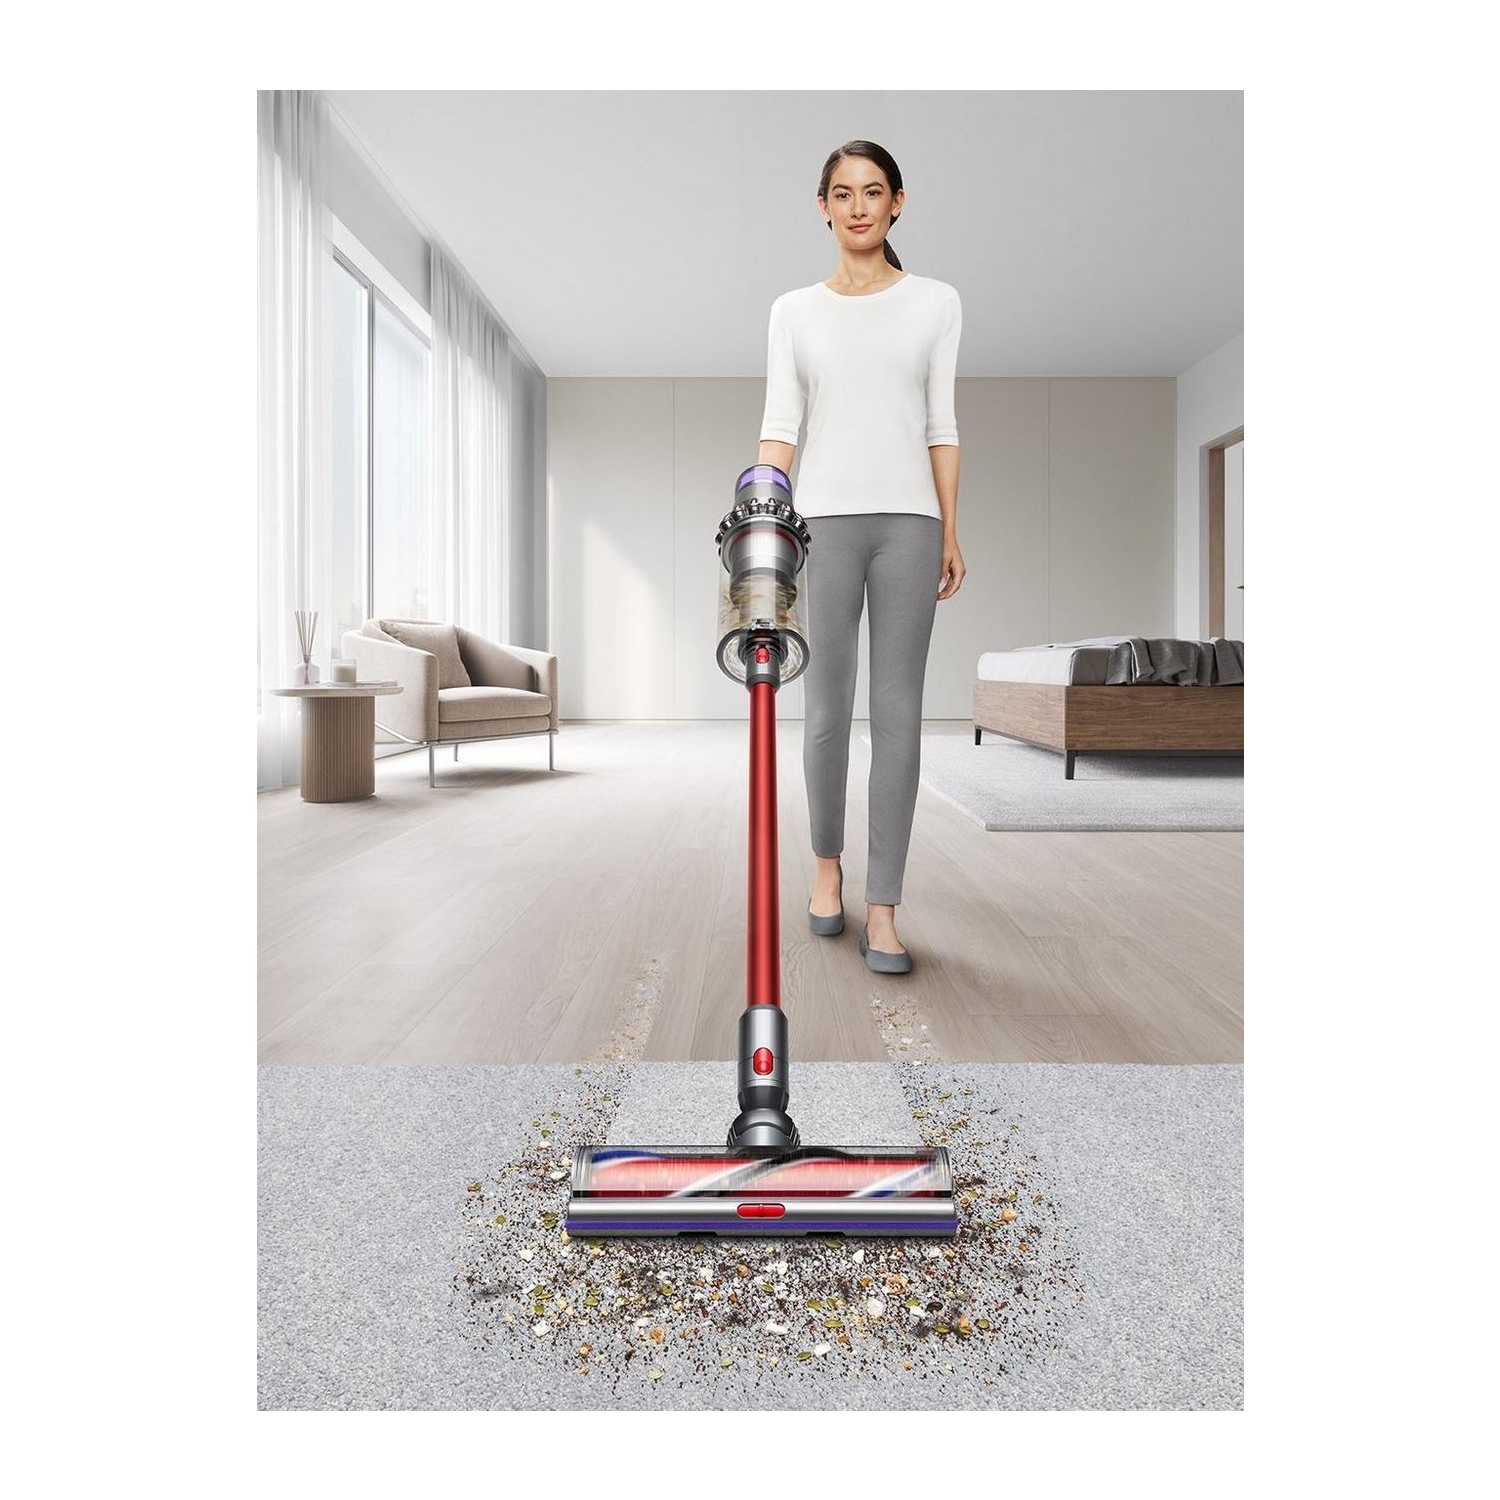 Dyson Outsize Absolute Cordless Vaccuum Cleaner - 120 Minutes Run Time - 6